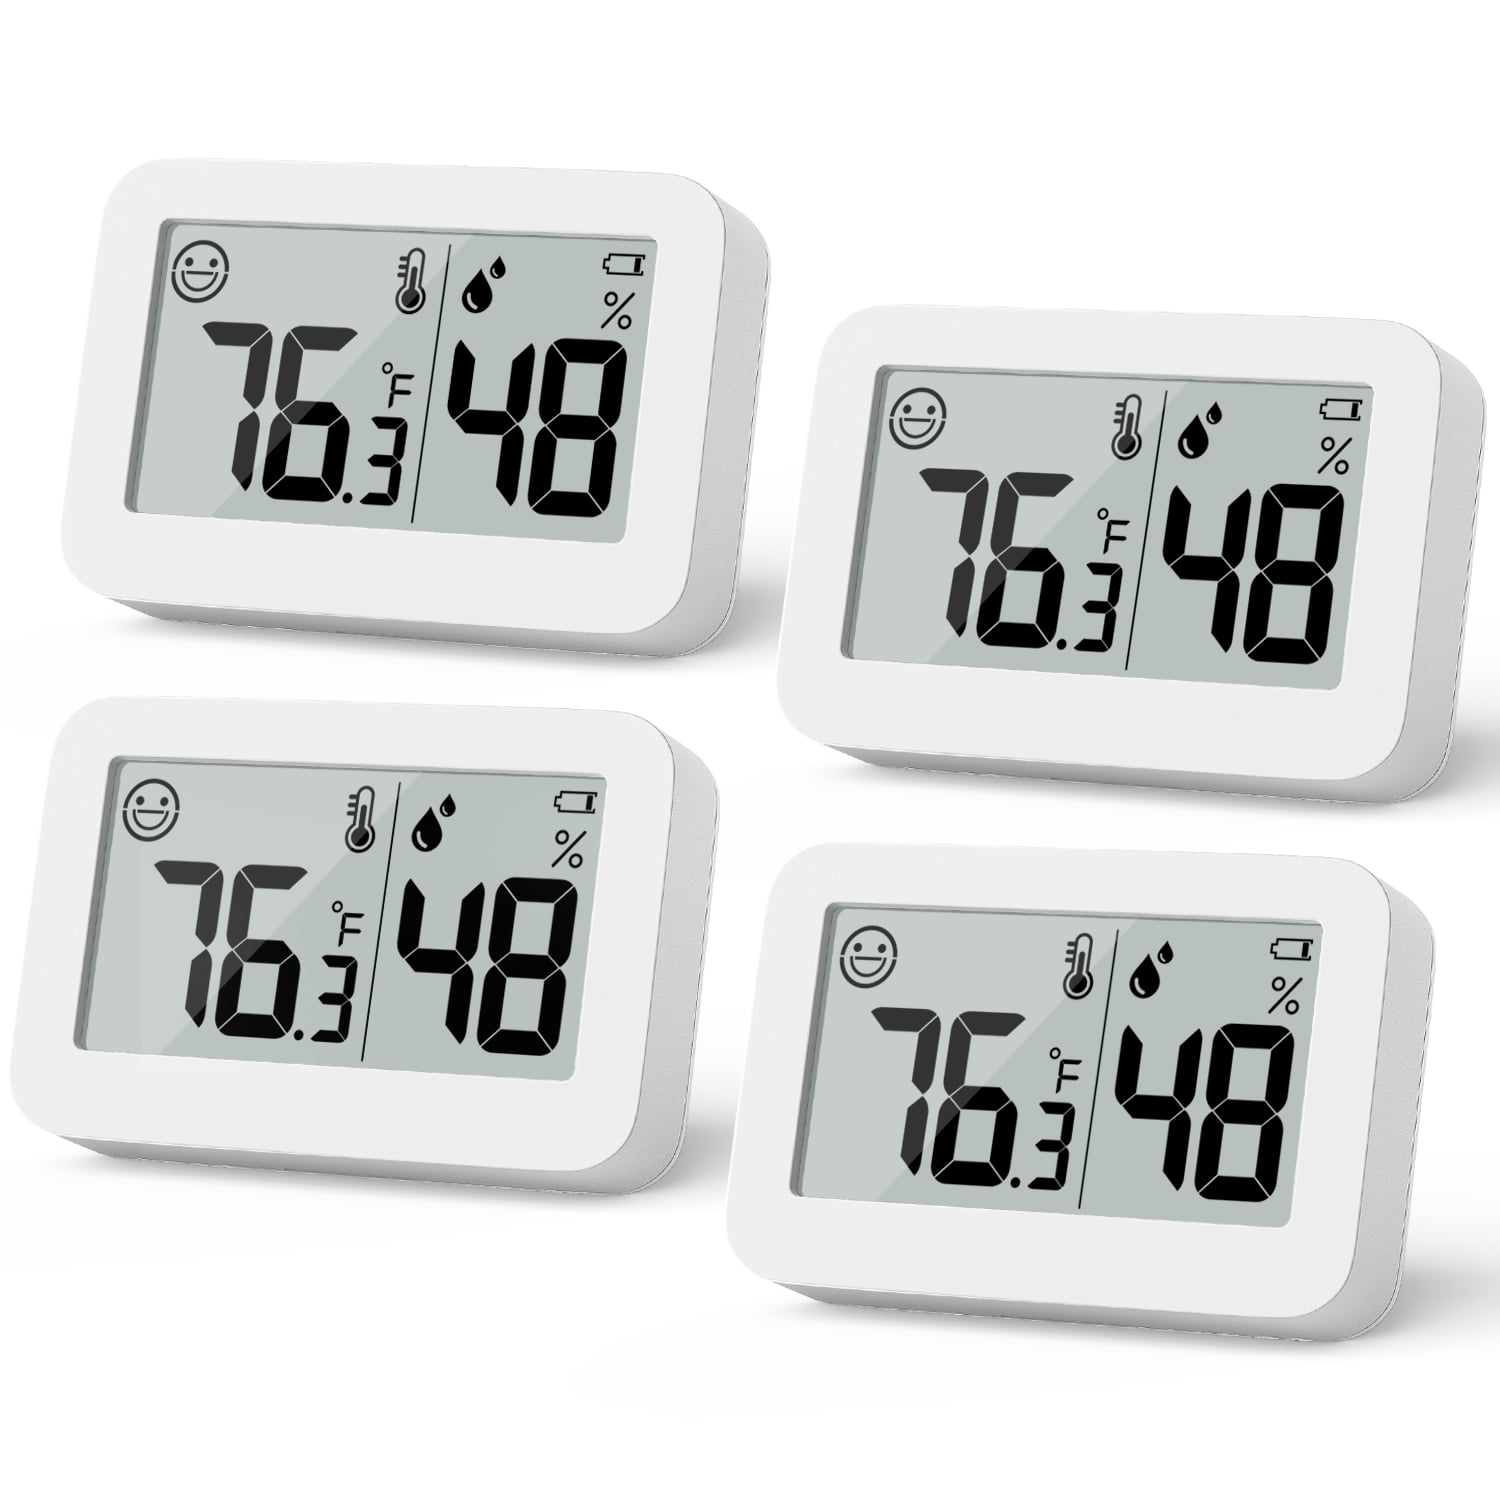 KeeKit Digital Hygrometer Thermometer, Indoor Temperature Humidity Monitor,  Mini Humidity Gauge Meter with ℃/℉ Switch for Home, Baby Room, Greenhouse,  White, 2 Pack - Yahoo Shopping